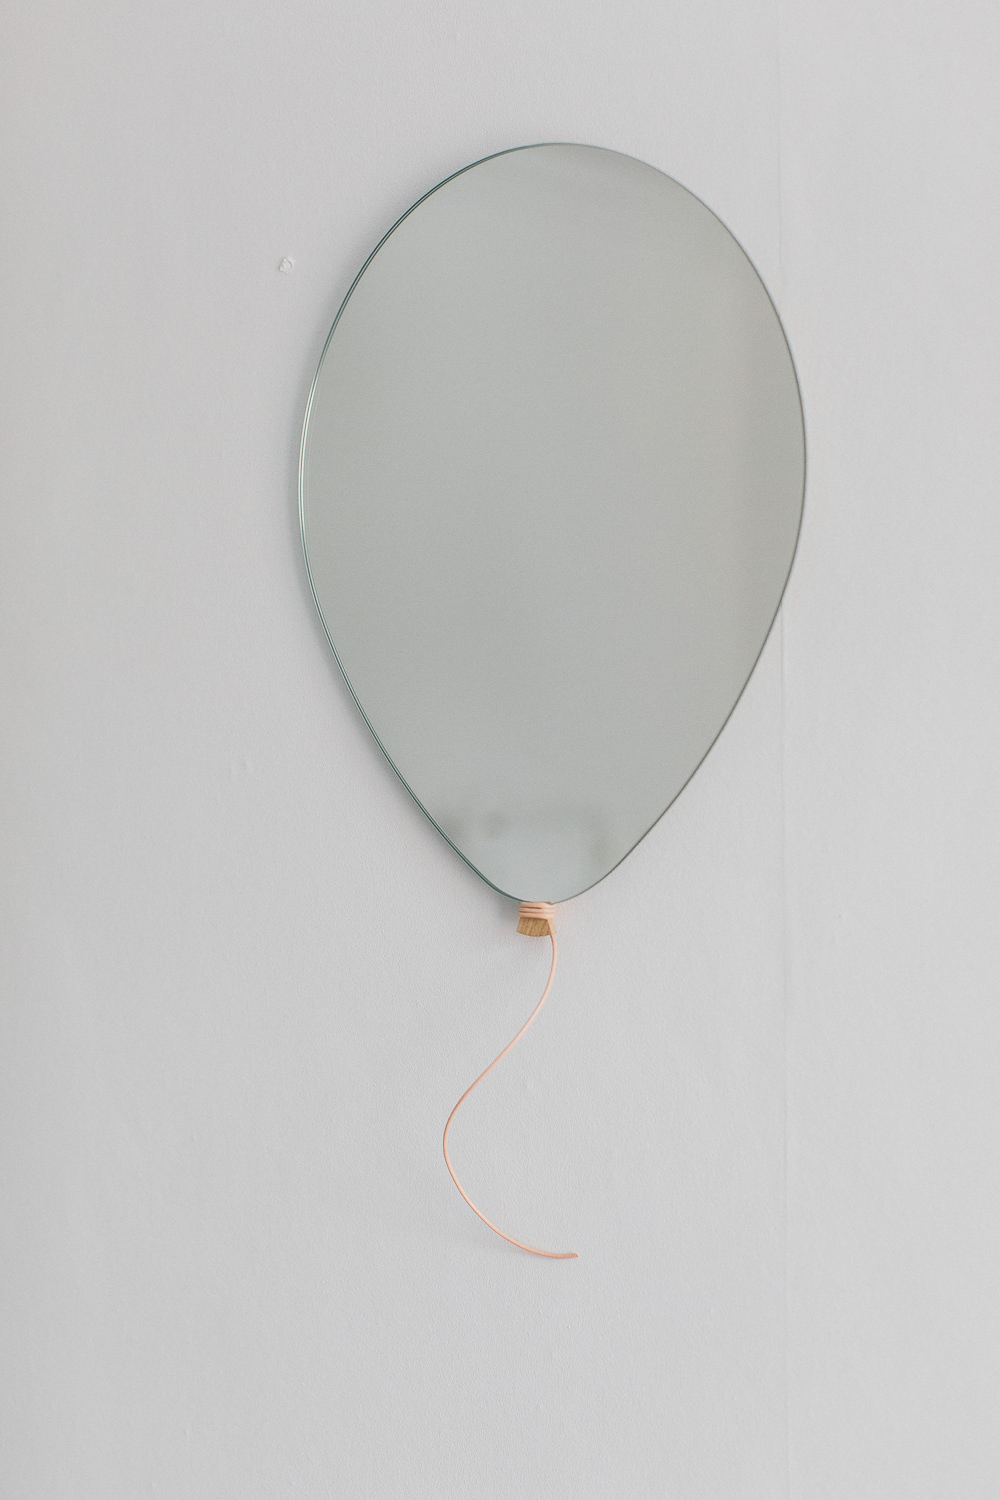 Balloon wall mirror | A modern neutral millennial pink bedroom for children with handmade furniture, personalised artwork and statement lighting